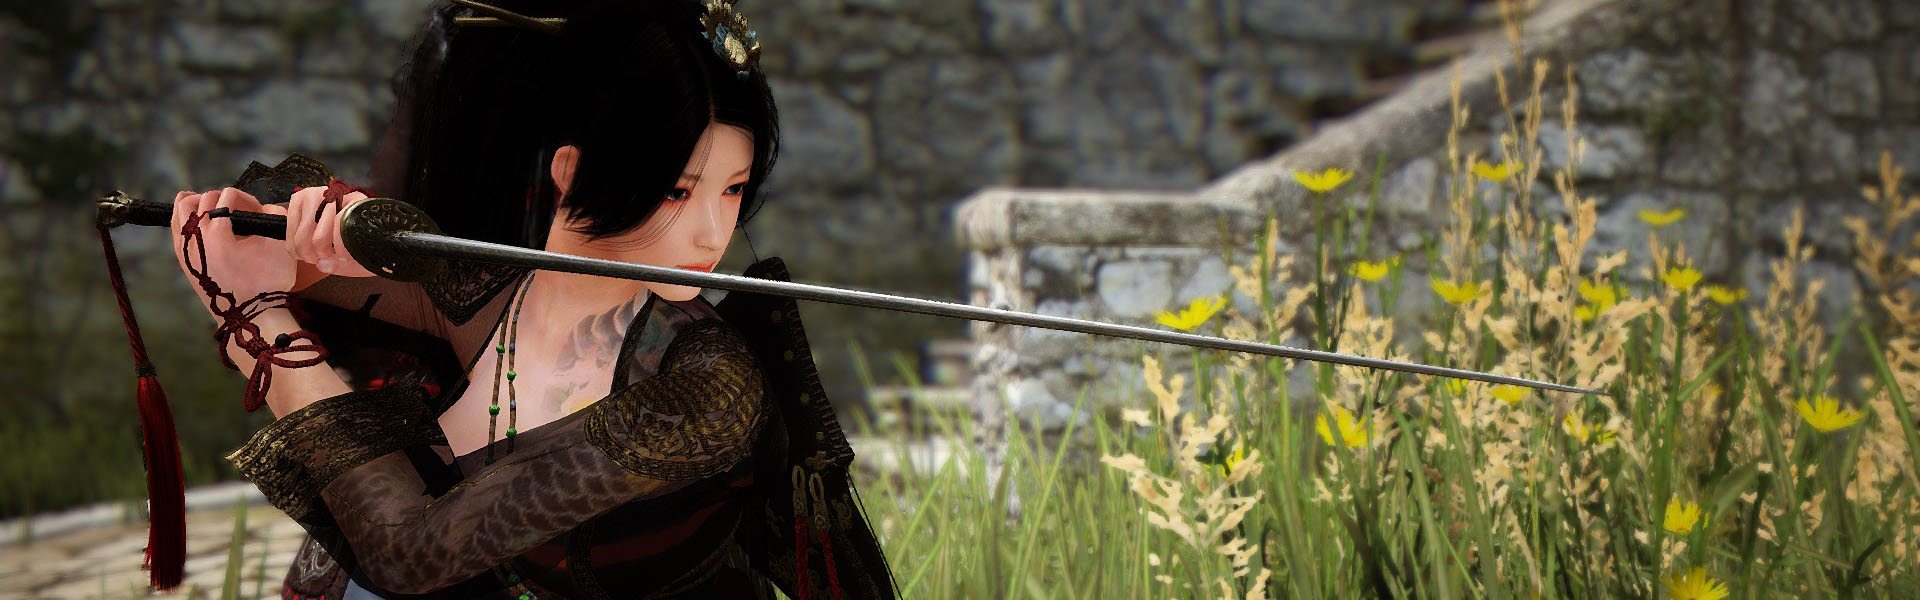 Musa and Maehwa will join Black Desert Online on April 20 4